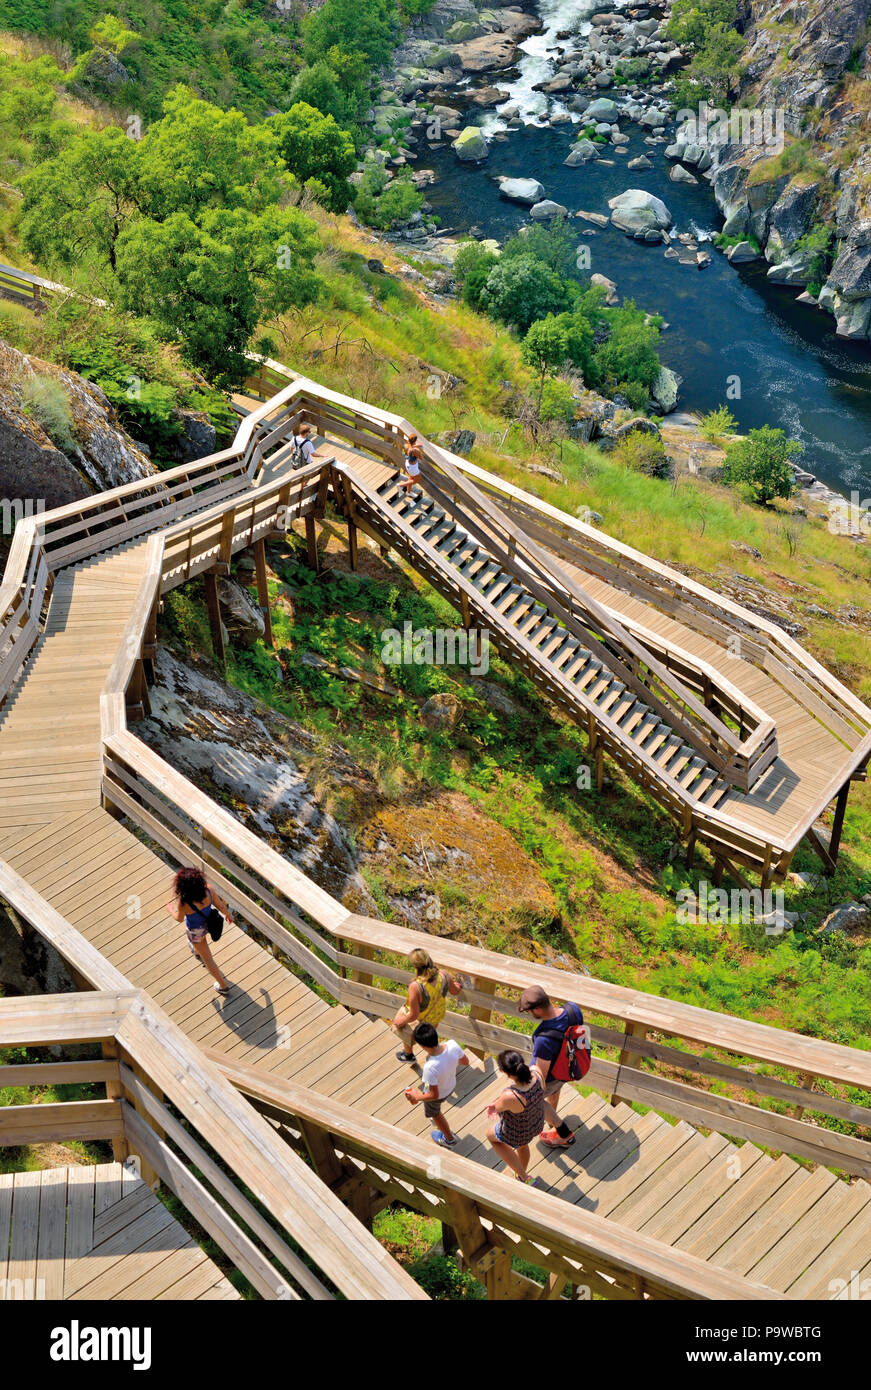 People stepping down wooden staircase towards  green and rocky river canyon Stock Photo